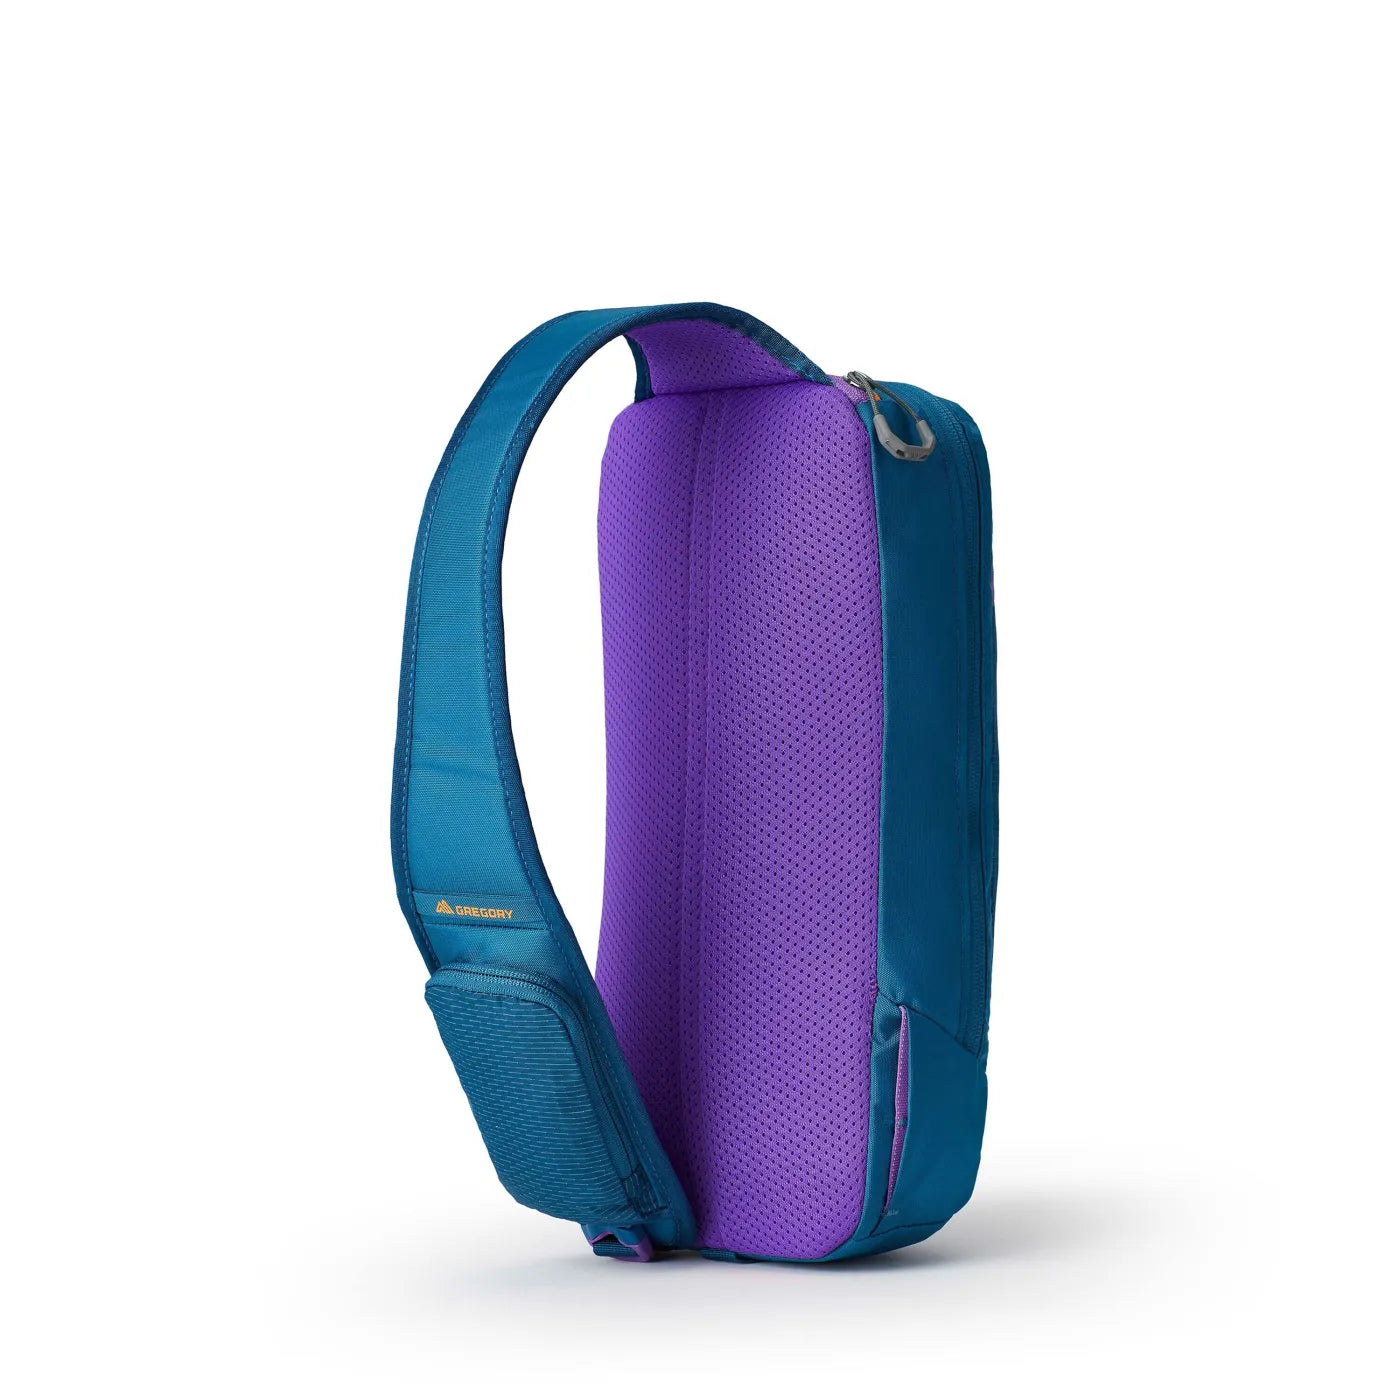 Gregory Nano Switch Sling shown in the Icon Teal color option. Back view.